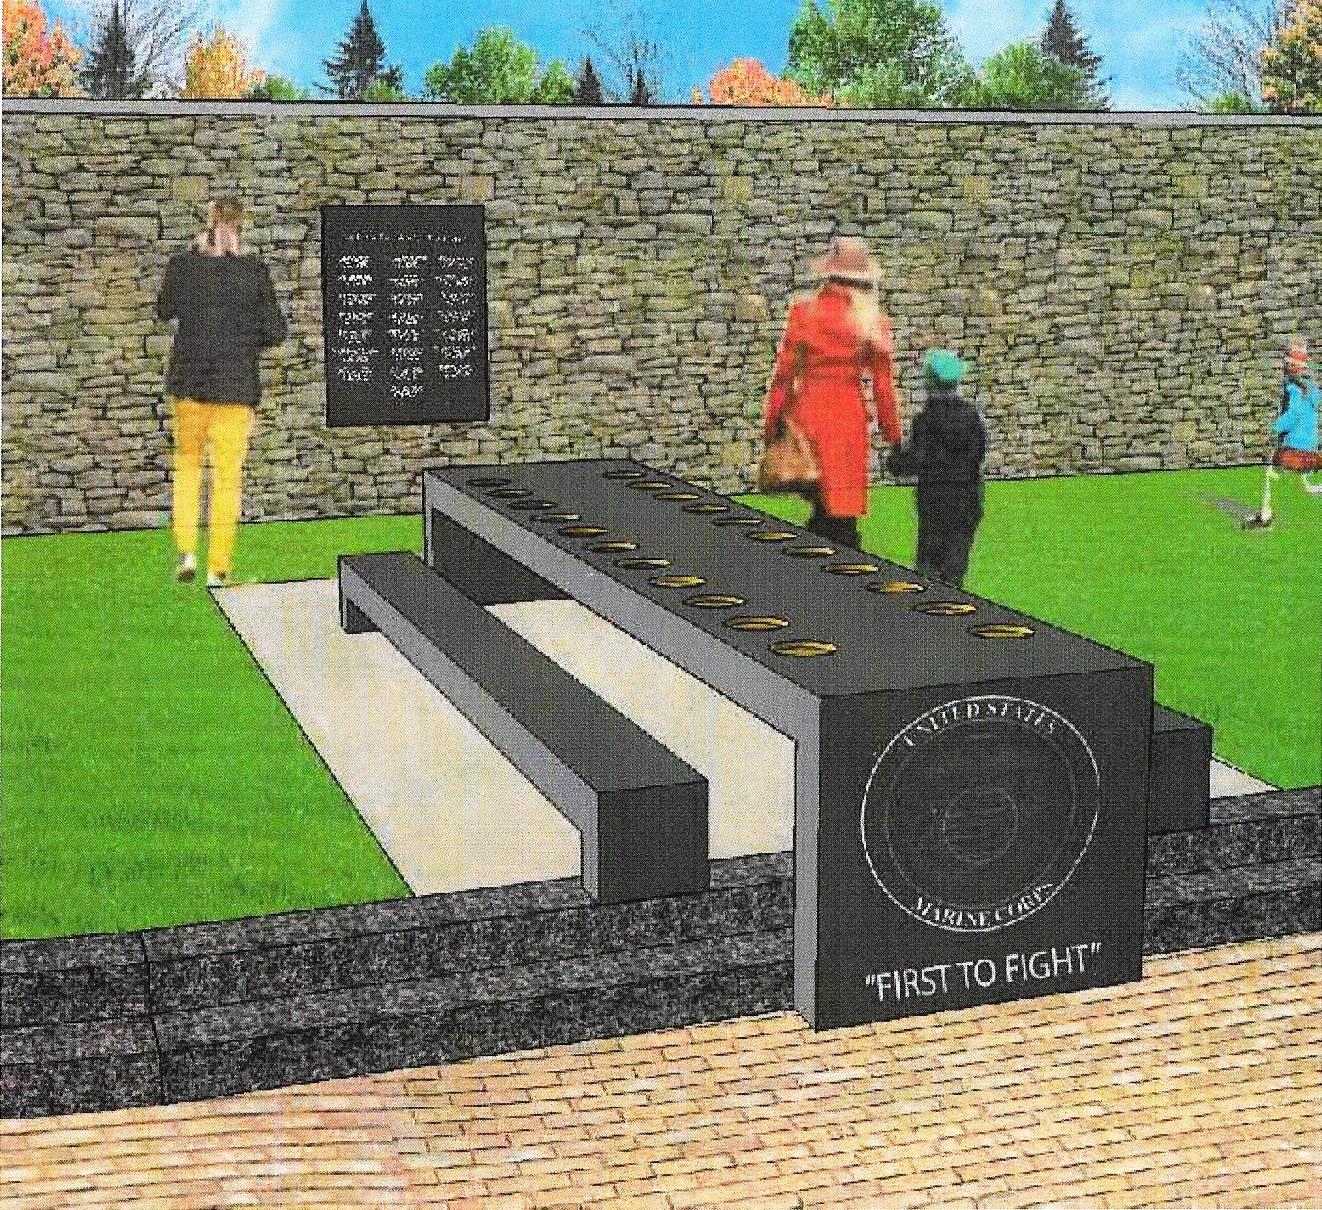 Have you heard of the Memorial being built in Chesterfield, Michigan?